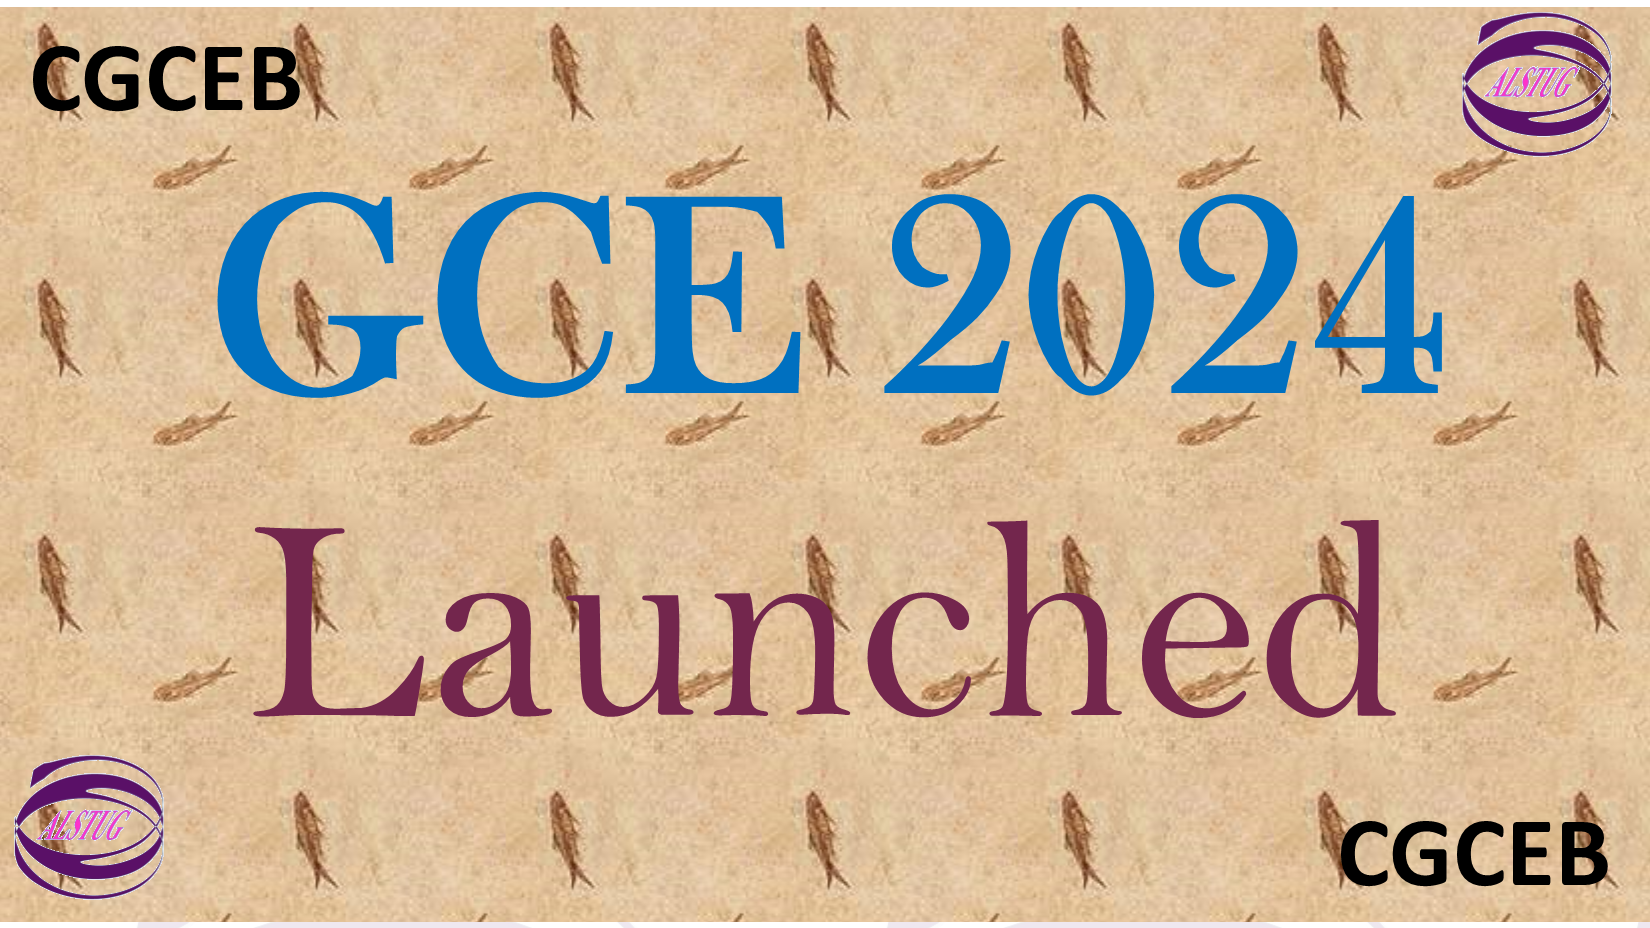 Blog Imageuploads/blogs/GCE 2024 launched.png